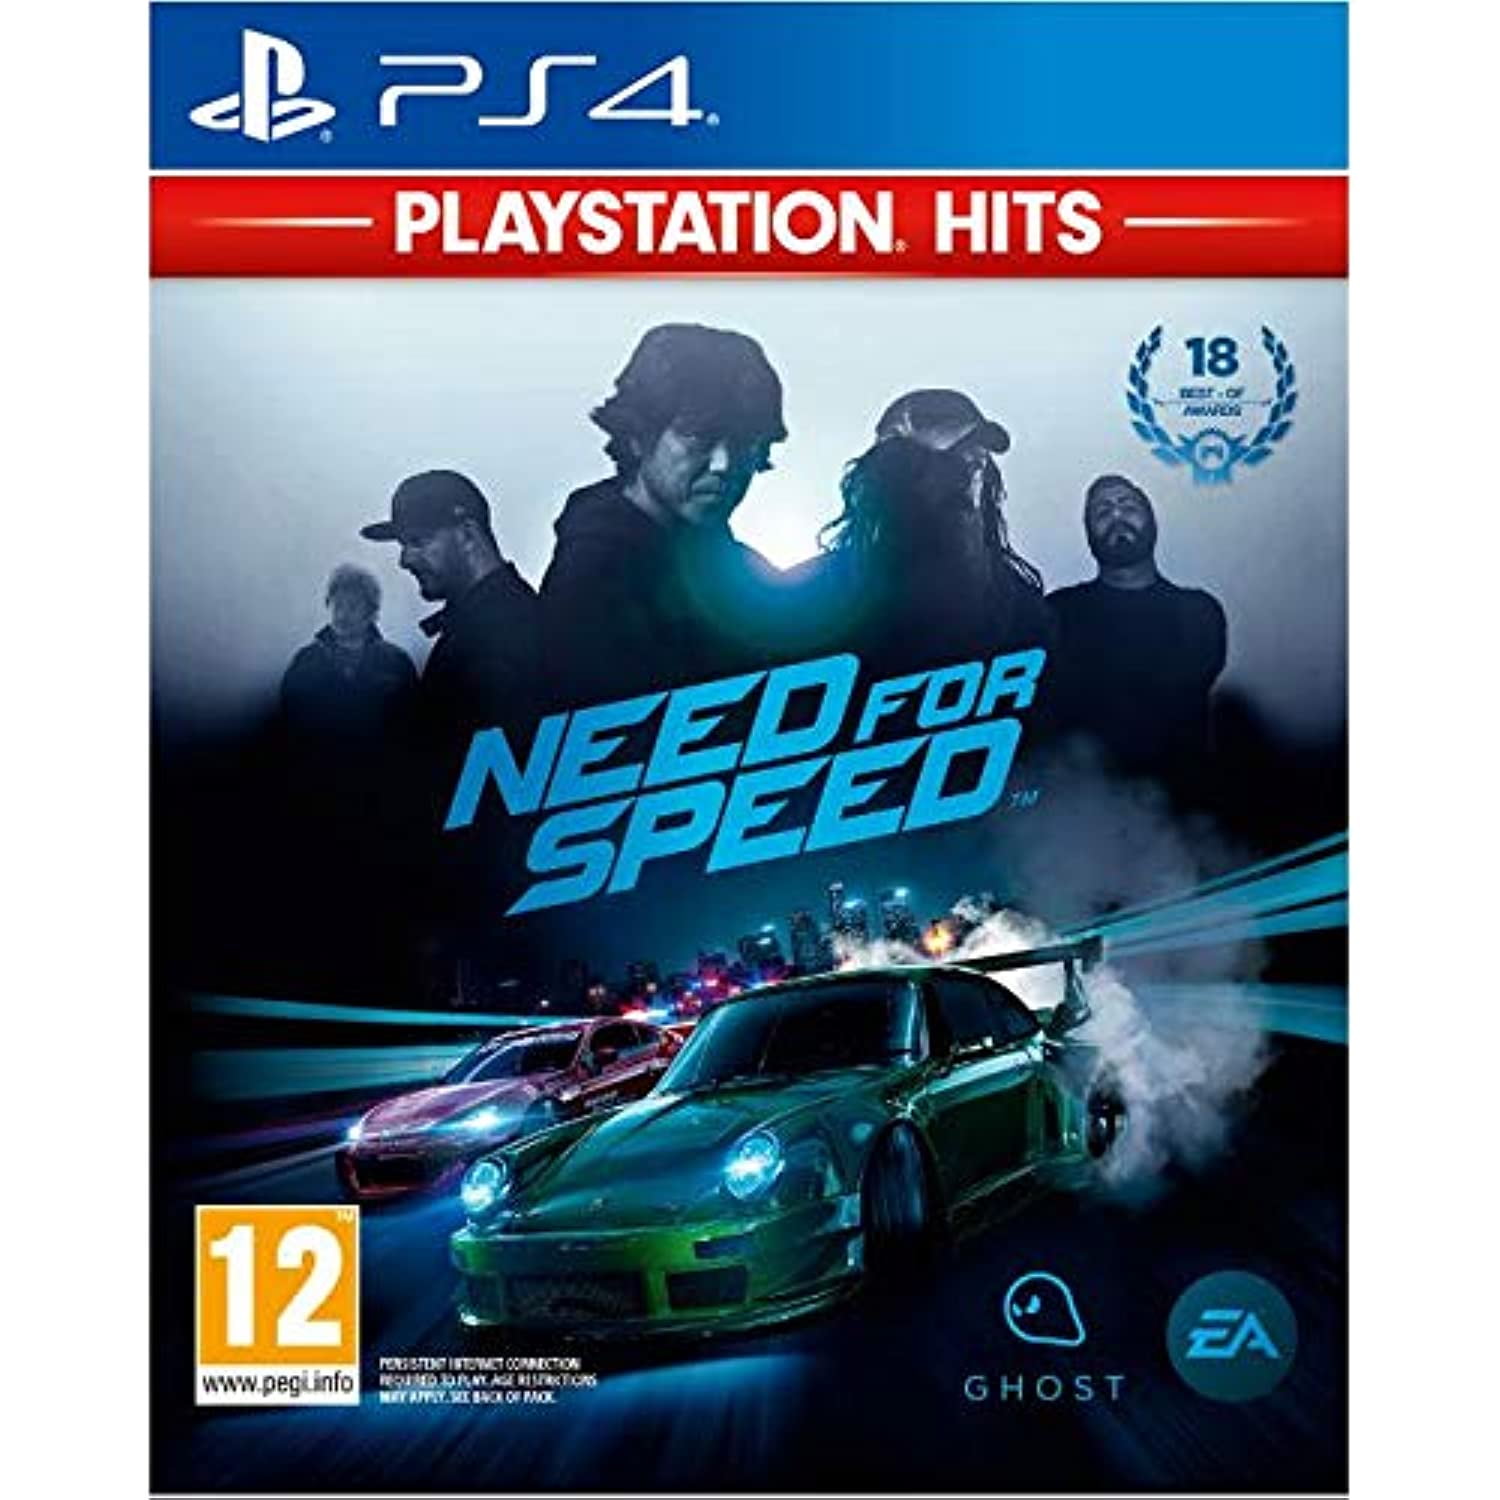 Need For Speed (Ps4) 